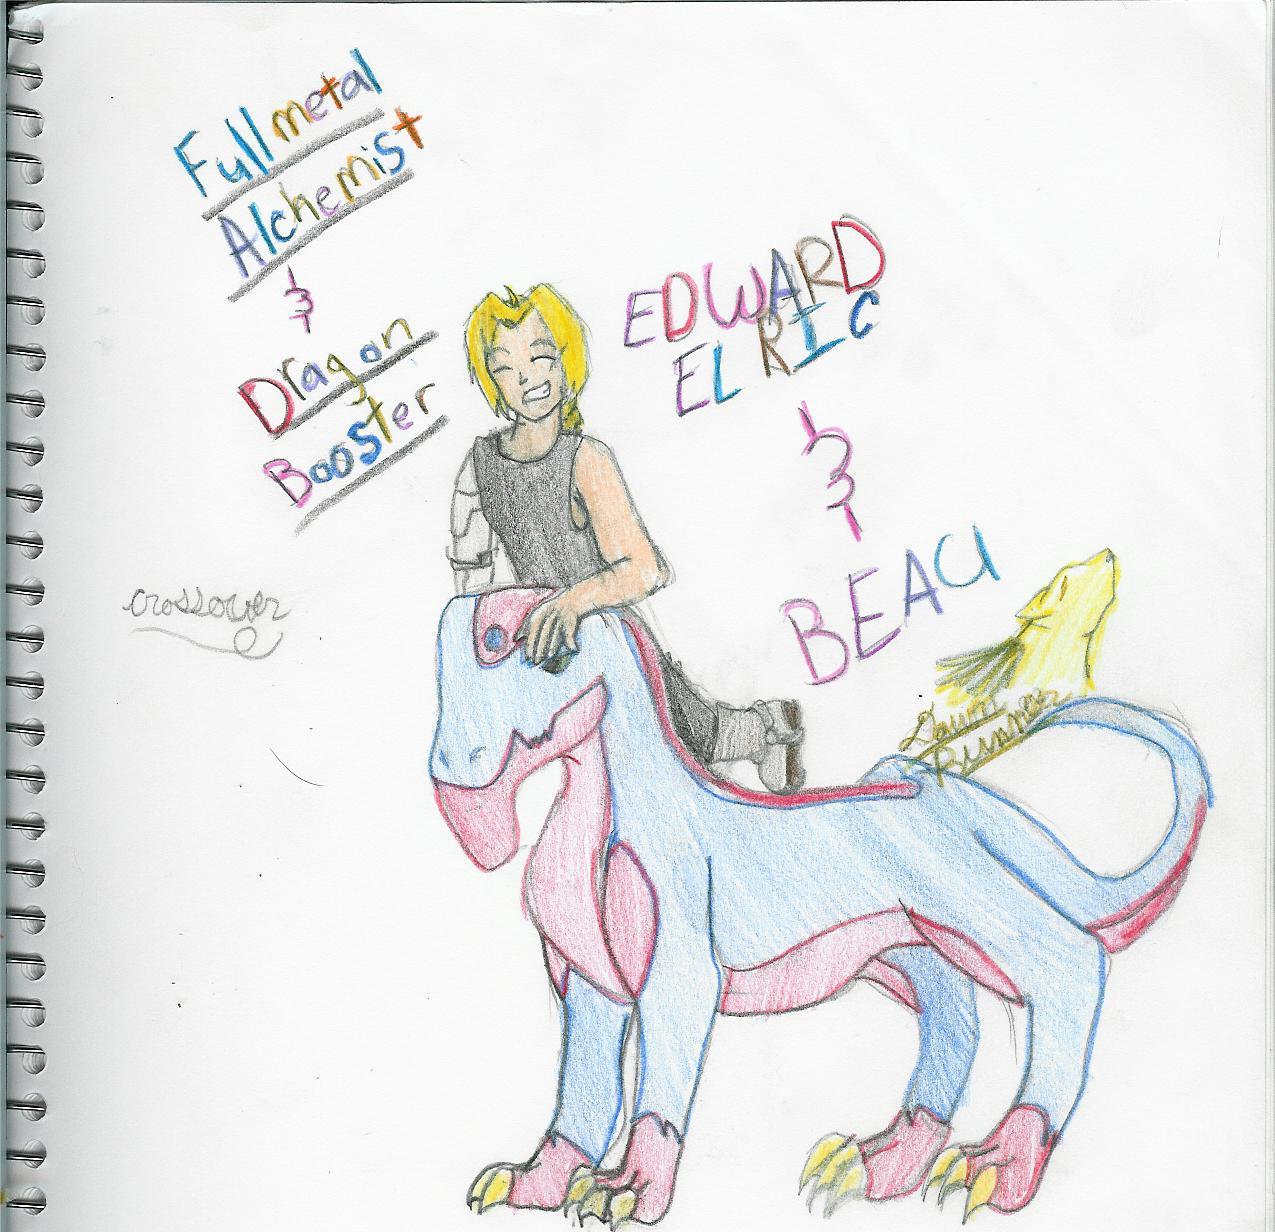 Edward Elric and Beau by winged_wolf_of_the_sky